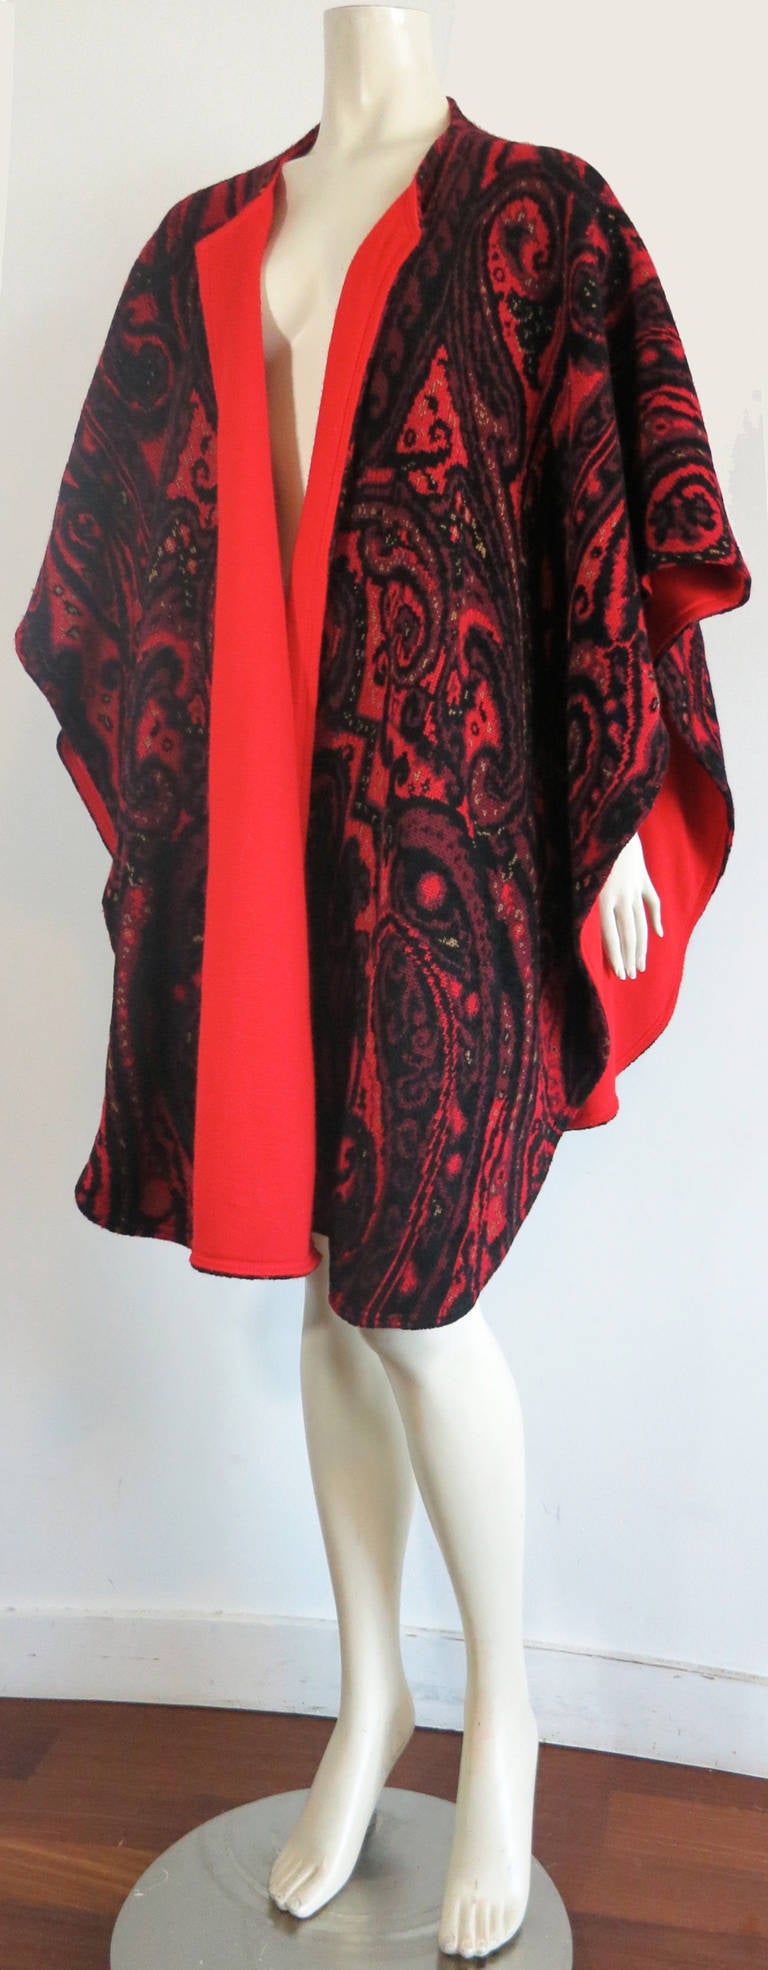 Fabulous, 1980s JEAN-LOUIS SCHERRER PARIS Paisley sweater cape wrap.

The sweater knit features deep, rich tones of burgundy red, purple, black cherry, and is lined in solid red at the reverse.

Open front design with the solid red lapels from